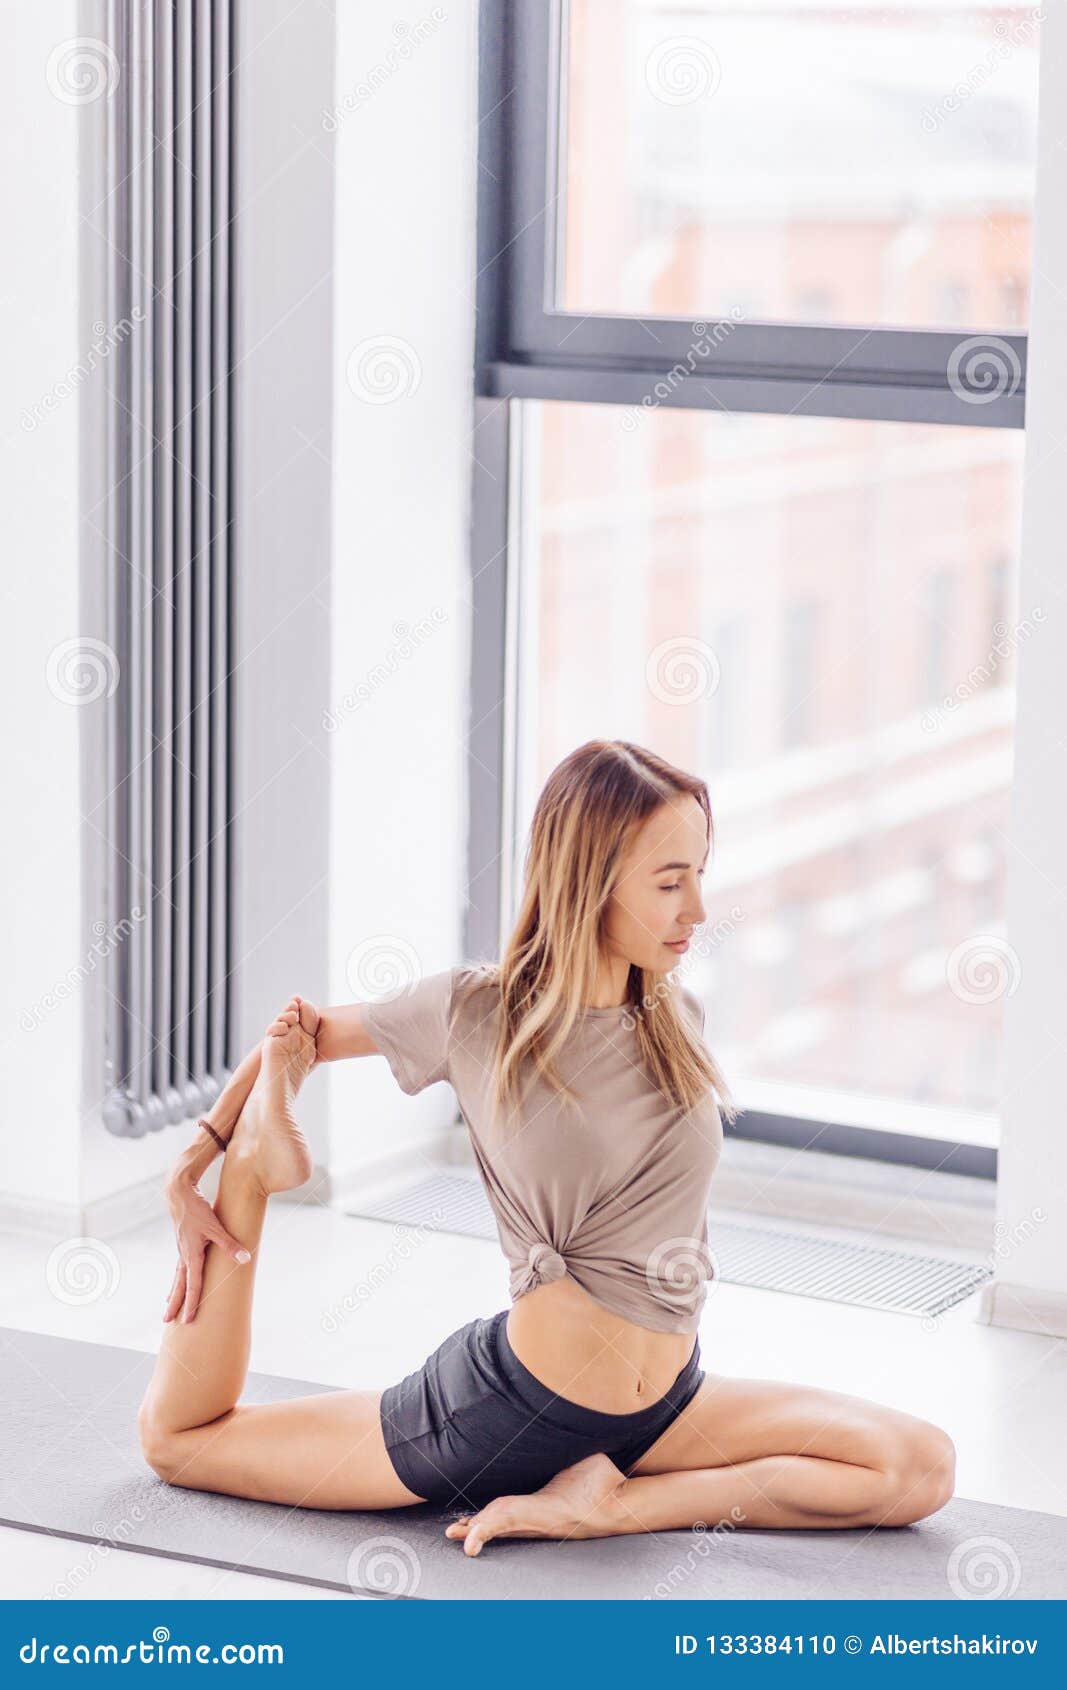 How To Get Flexible Legs. Extreme Yoga Stock Photo - Image of